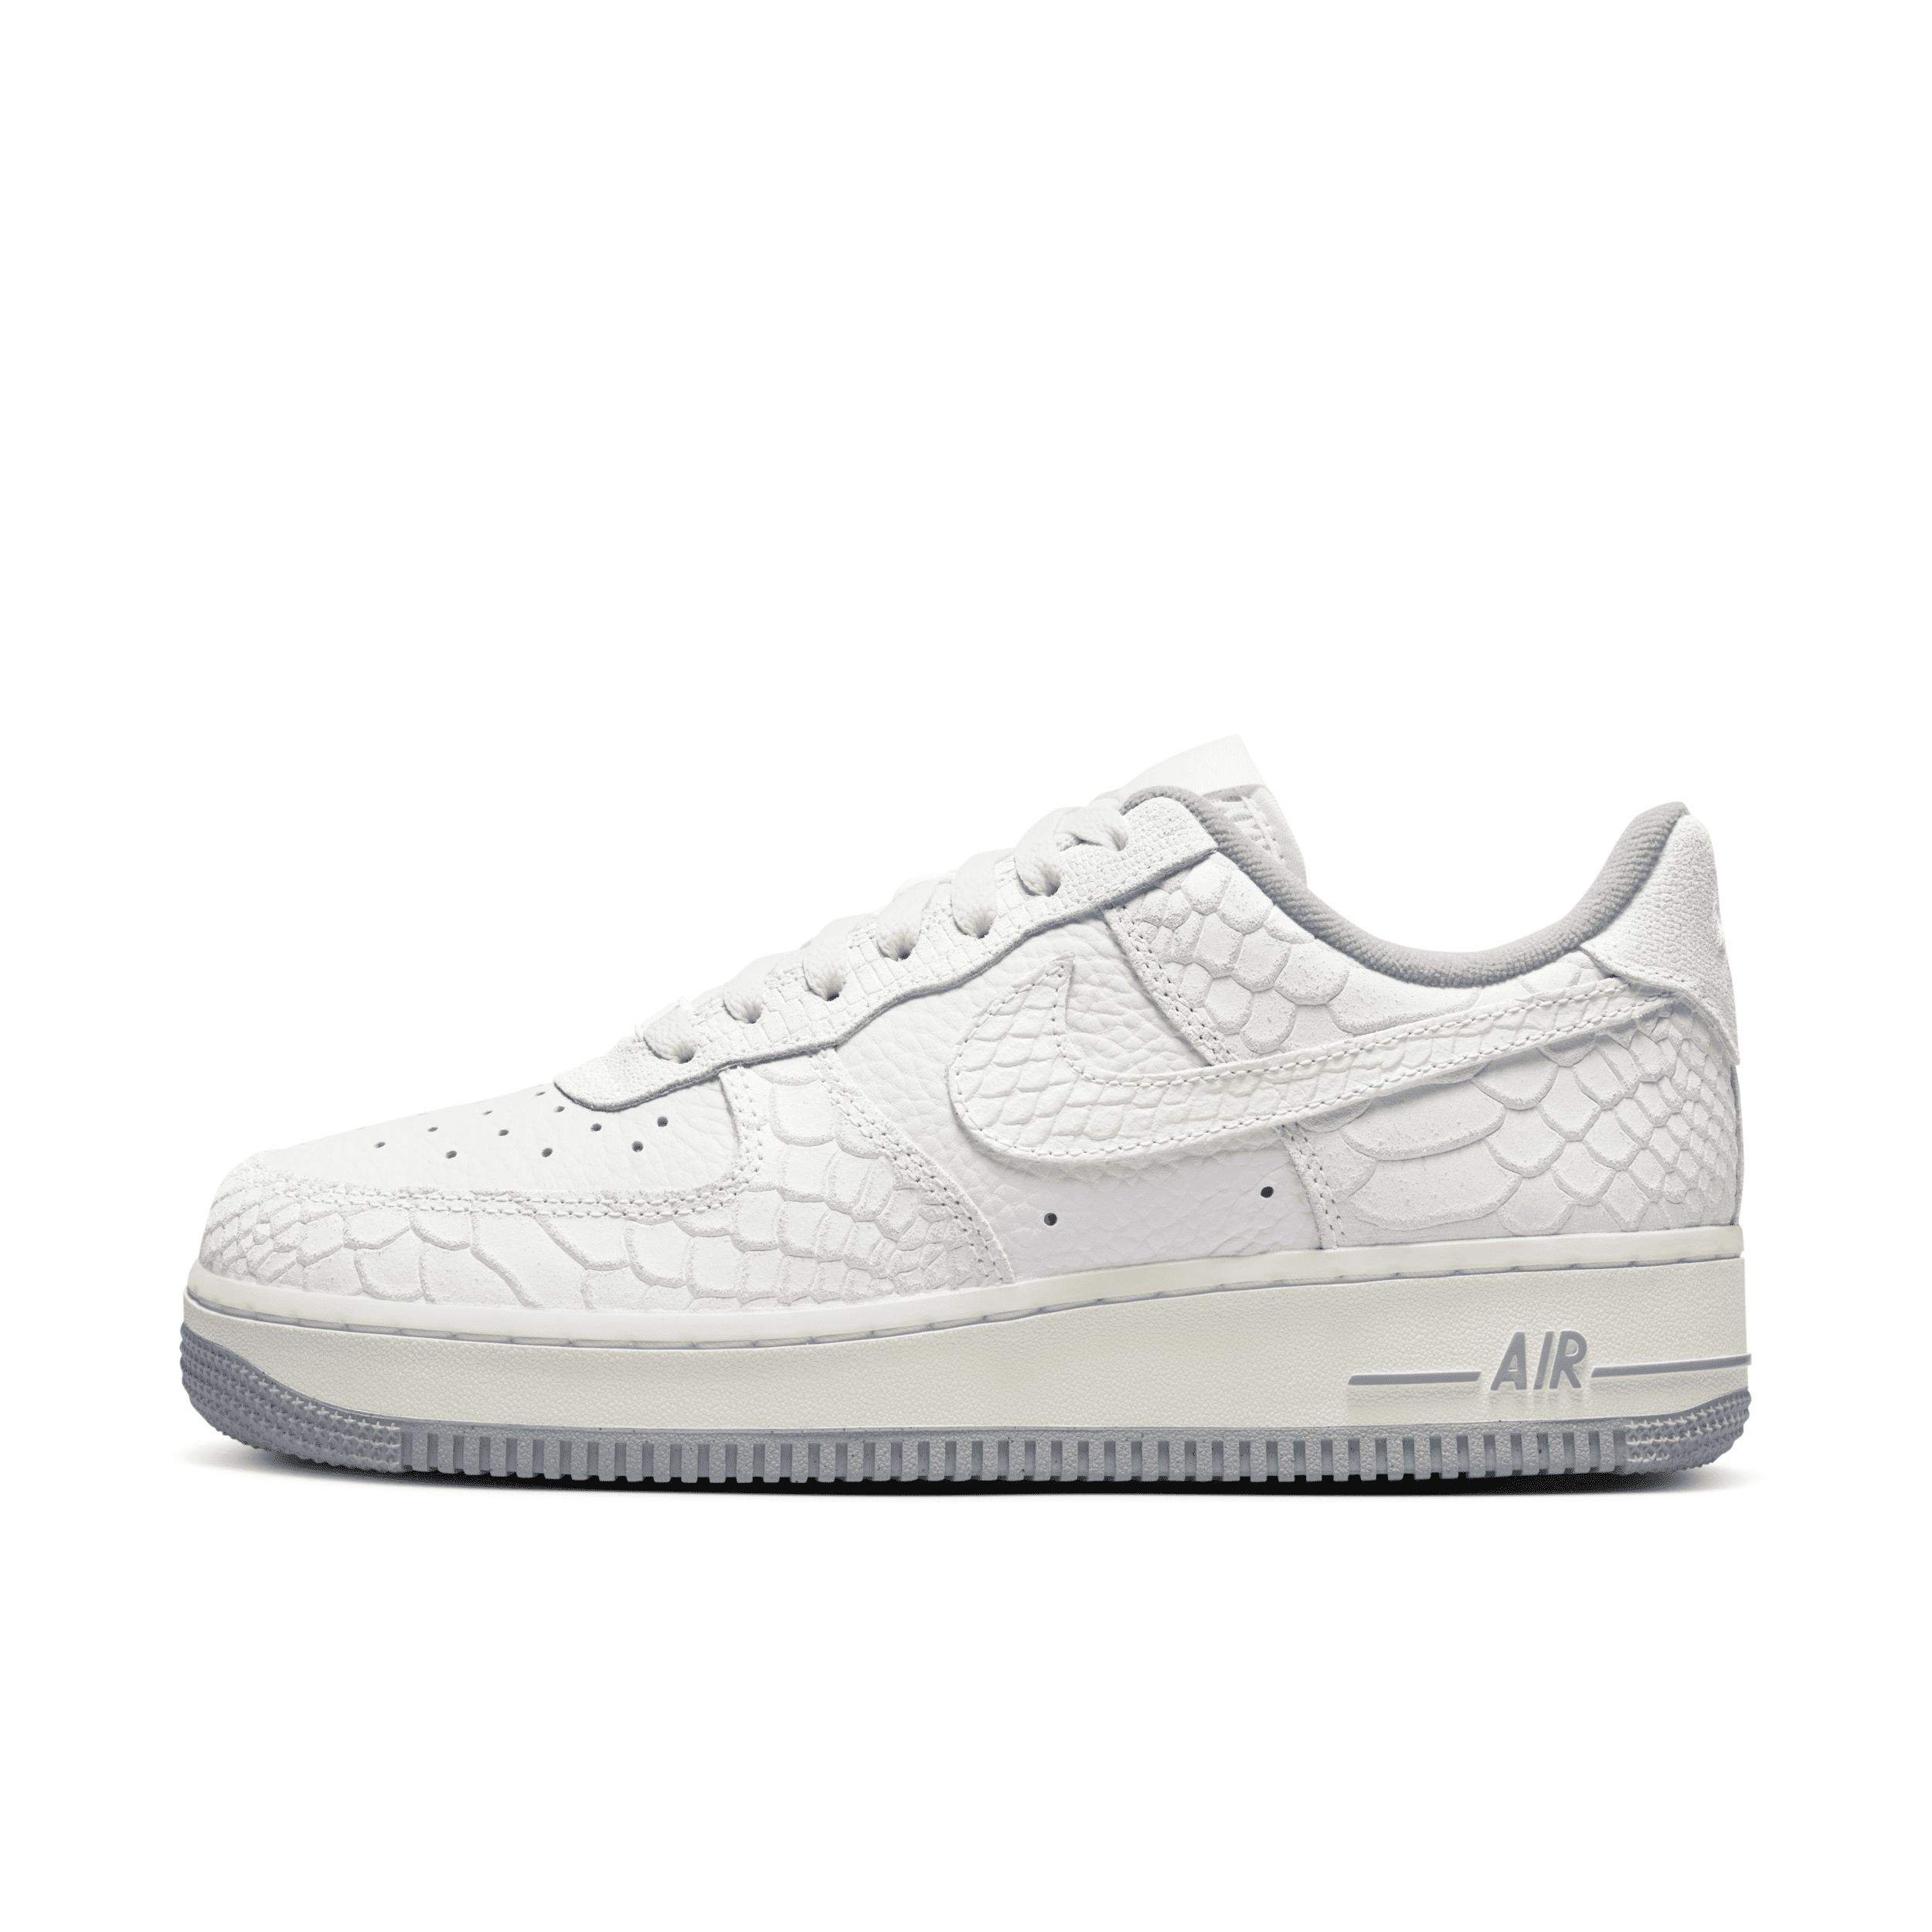 Nike Women's Air Force 1 '07 Shoes in White, Size: 8.5 | DX2678-100 | Nike (US)